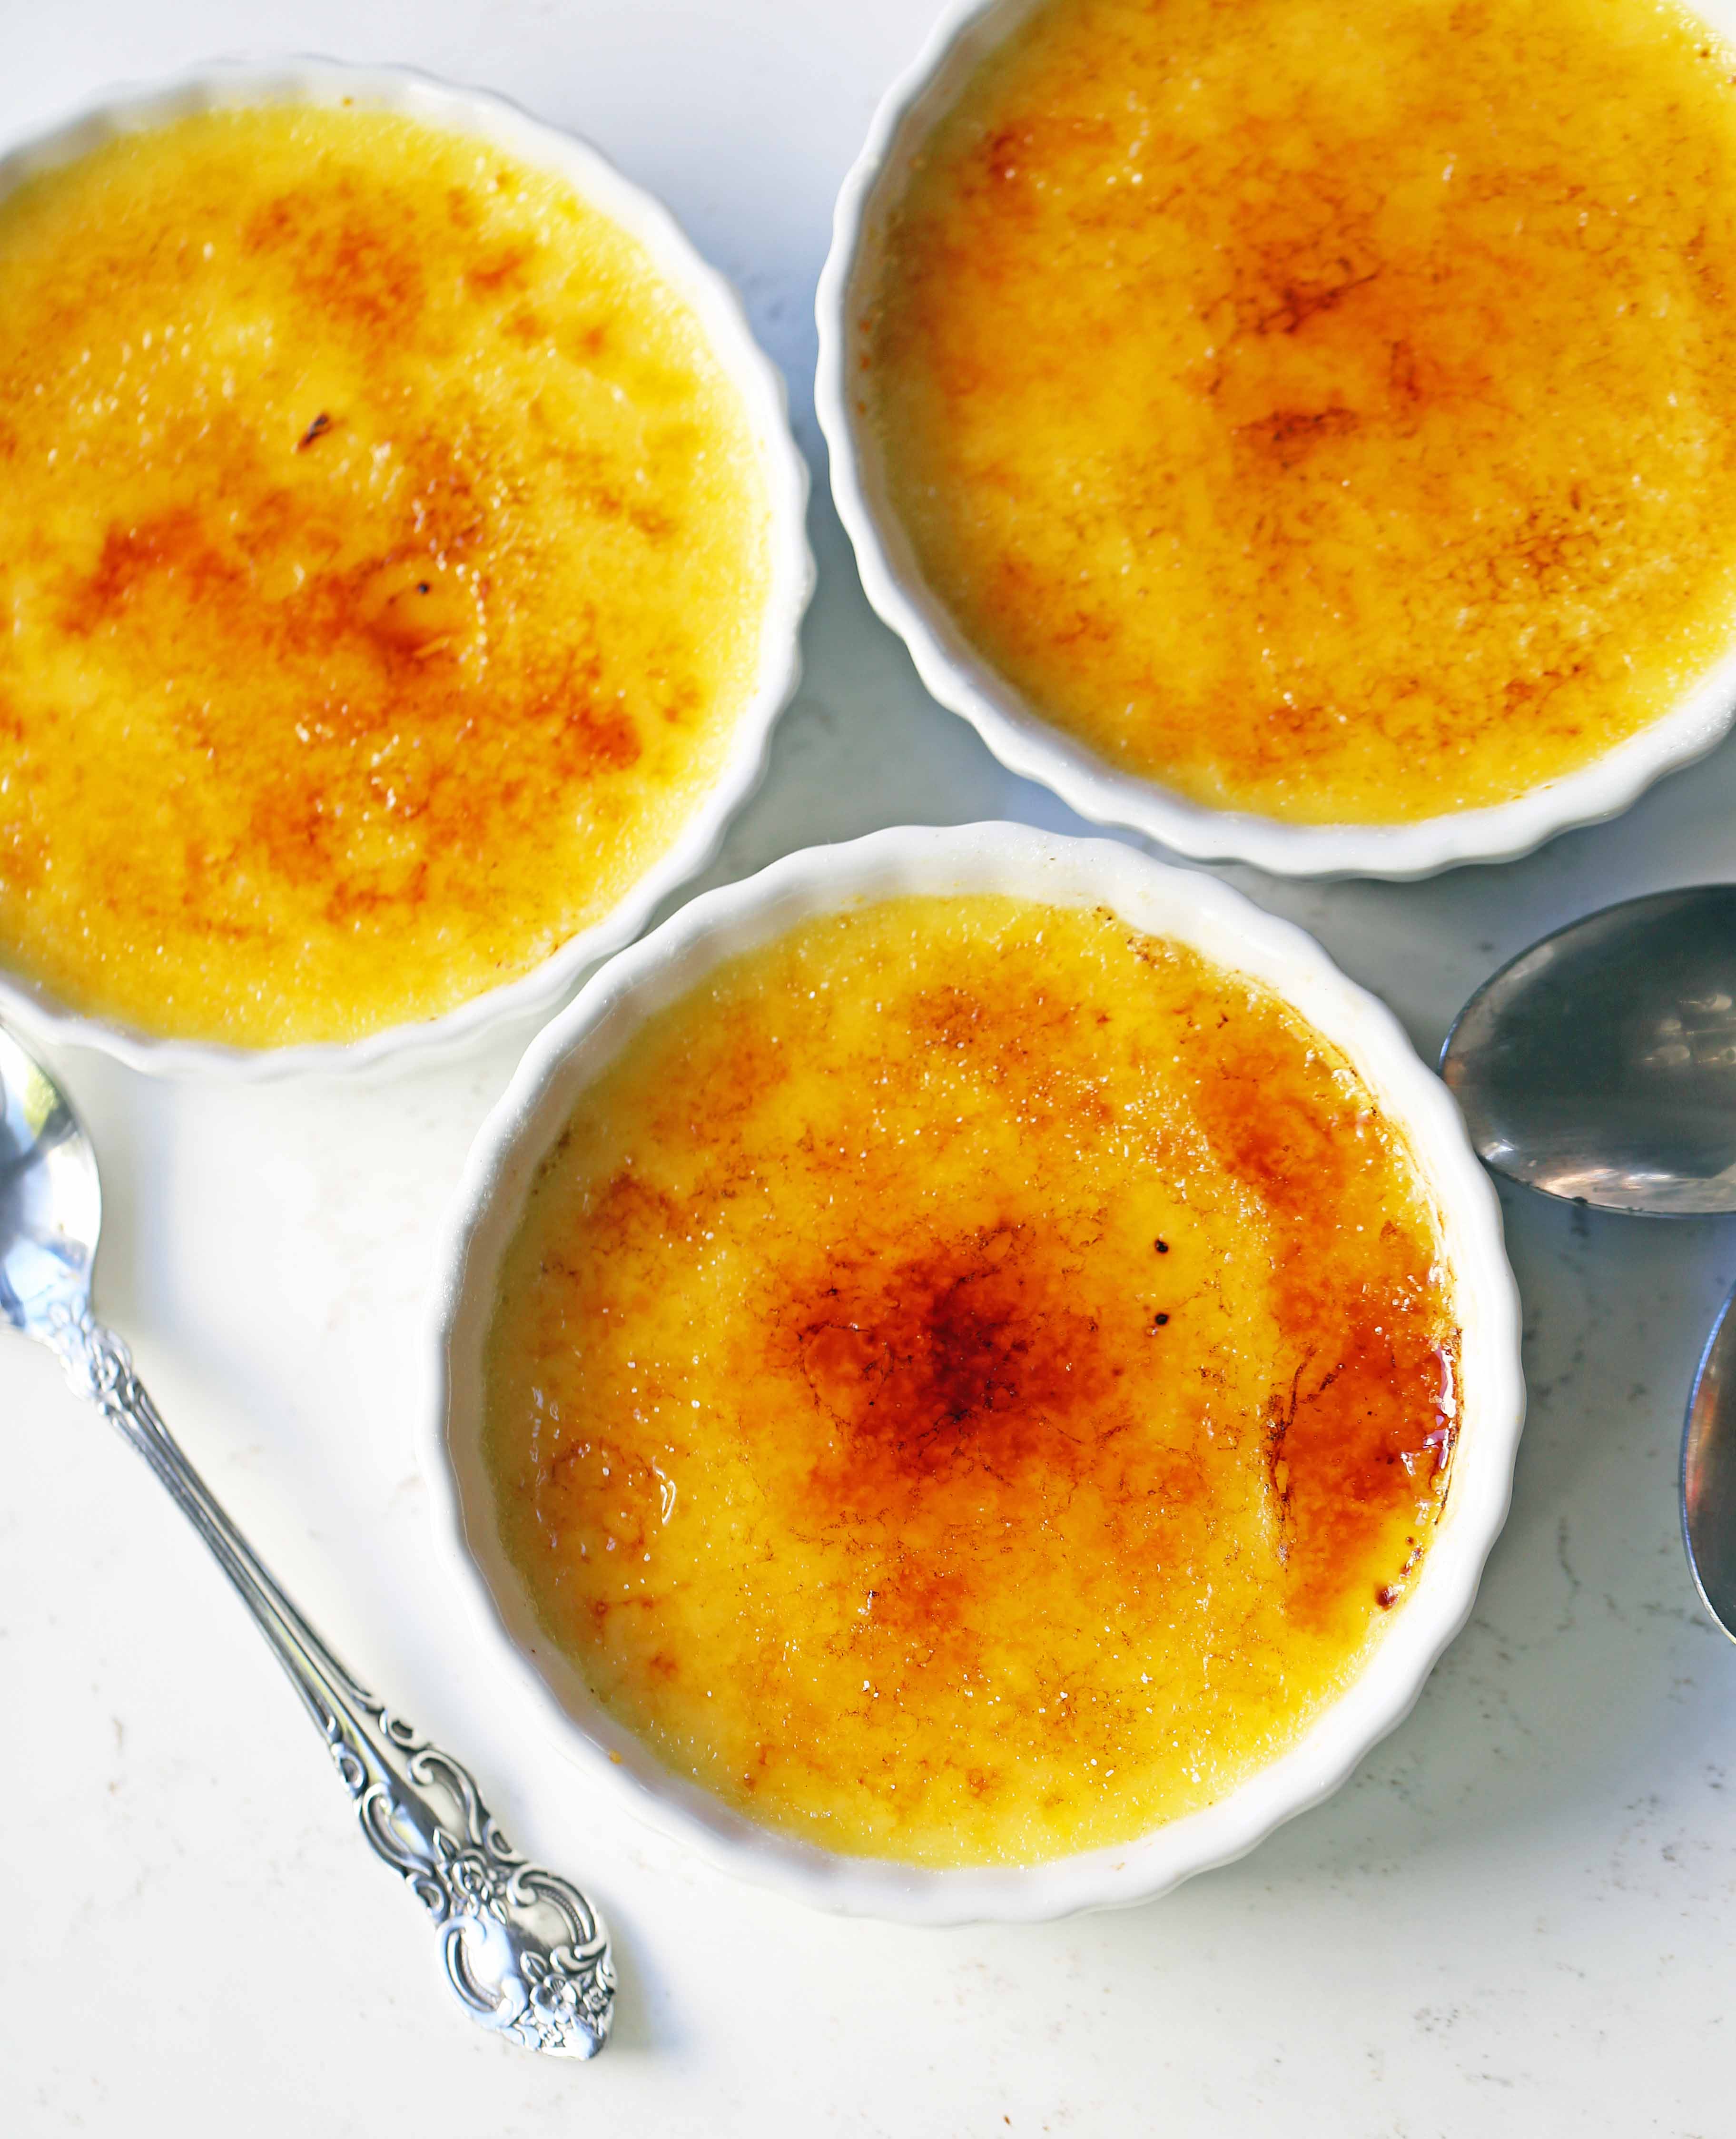 Creme Brulee Recipe. Howto make the best creme brulee. A creamy, silky vanilla custard topped with crisp sugar crust is one of the most popular desserts at restaurants for good reason. www.modernhoney.com #cremebrulee #vanillacremebrulee #dessert #valentinesday #valentinesdaydessert